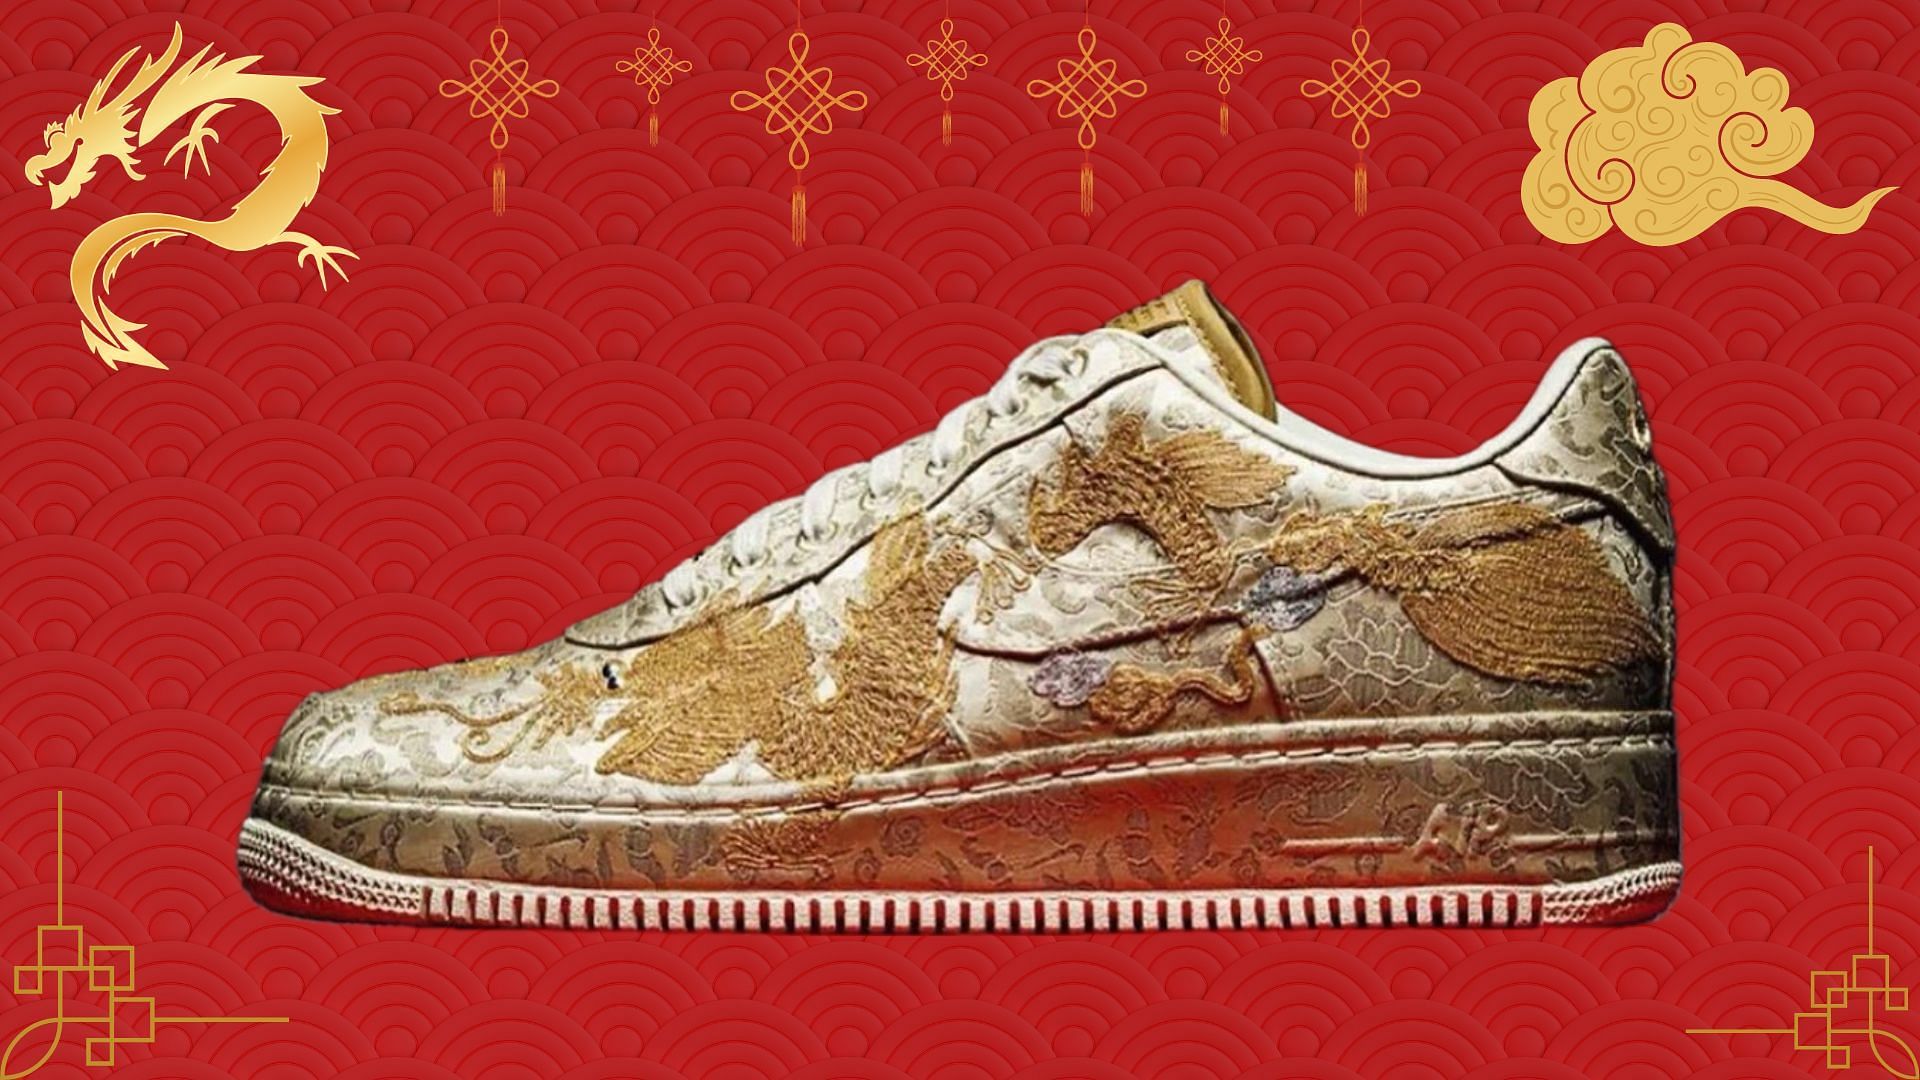 Nike Air Force 1 Low CNY Year of the Dragon sneakers (Image via Instagram/@shanghaisole)